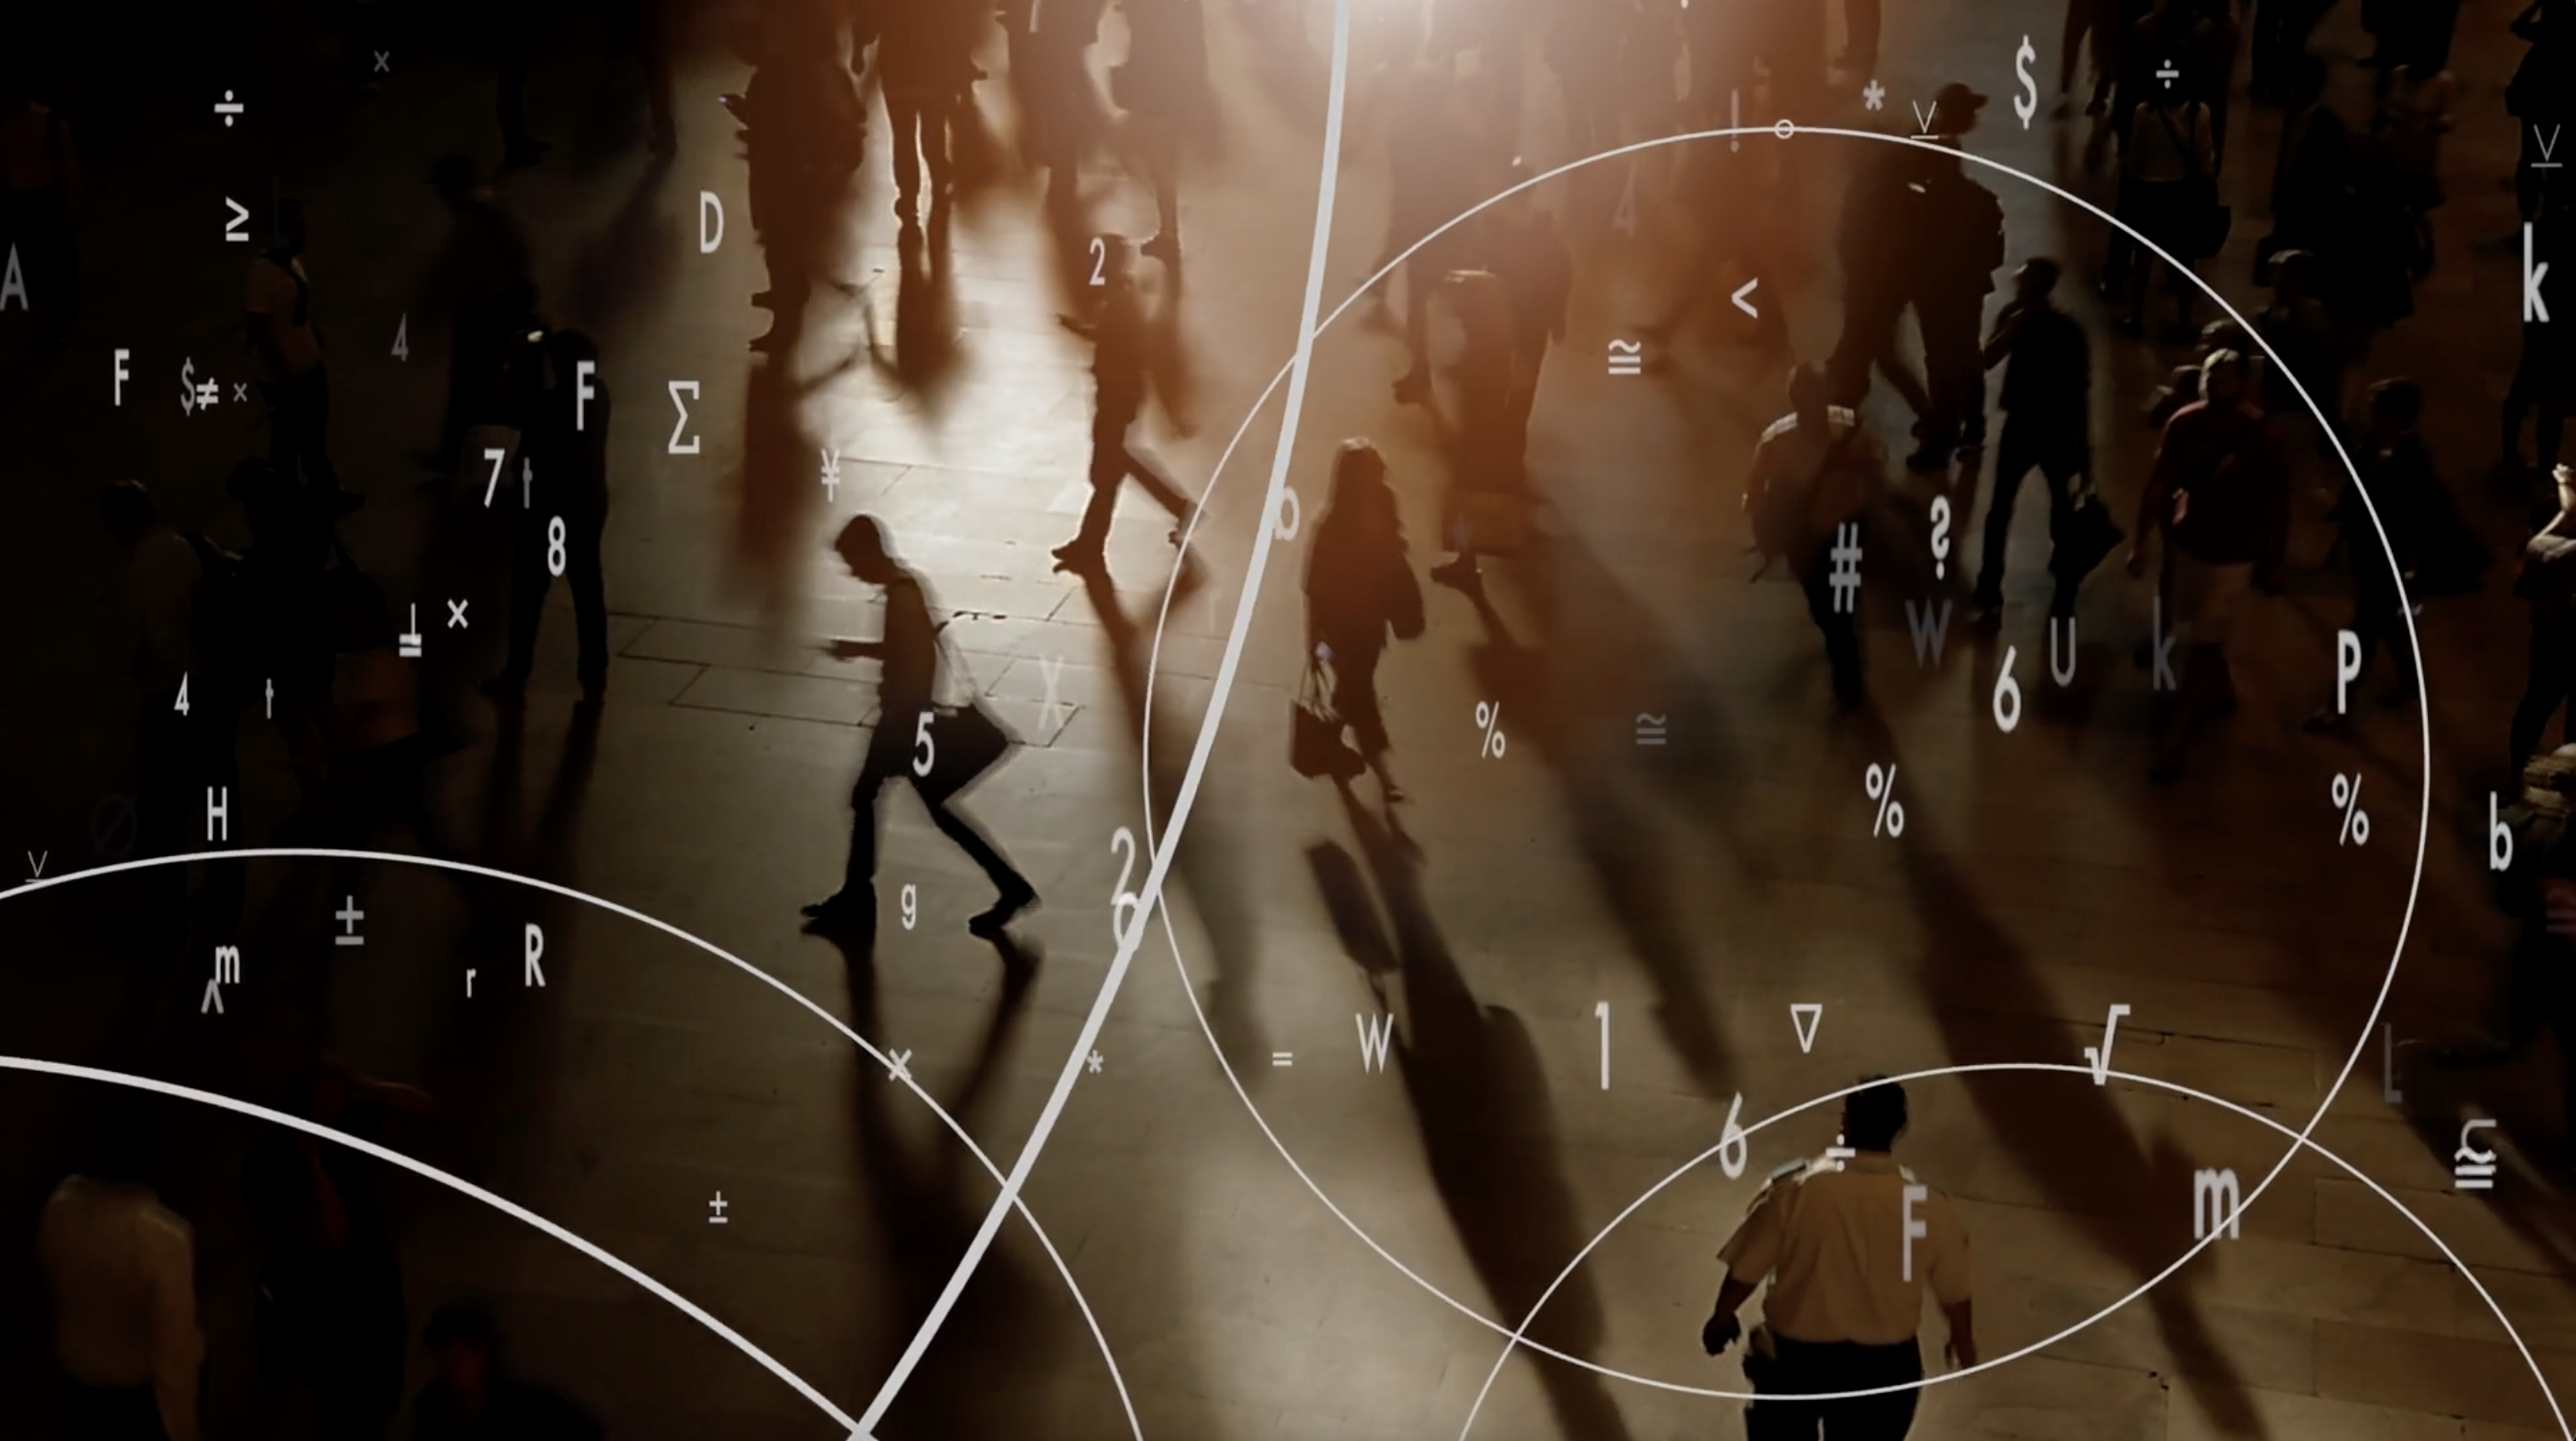 Surveillance image of people walking around with numbers and functions floating above them in circles